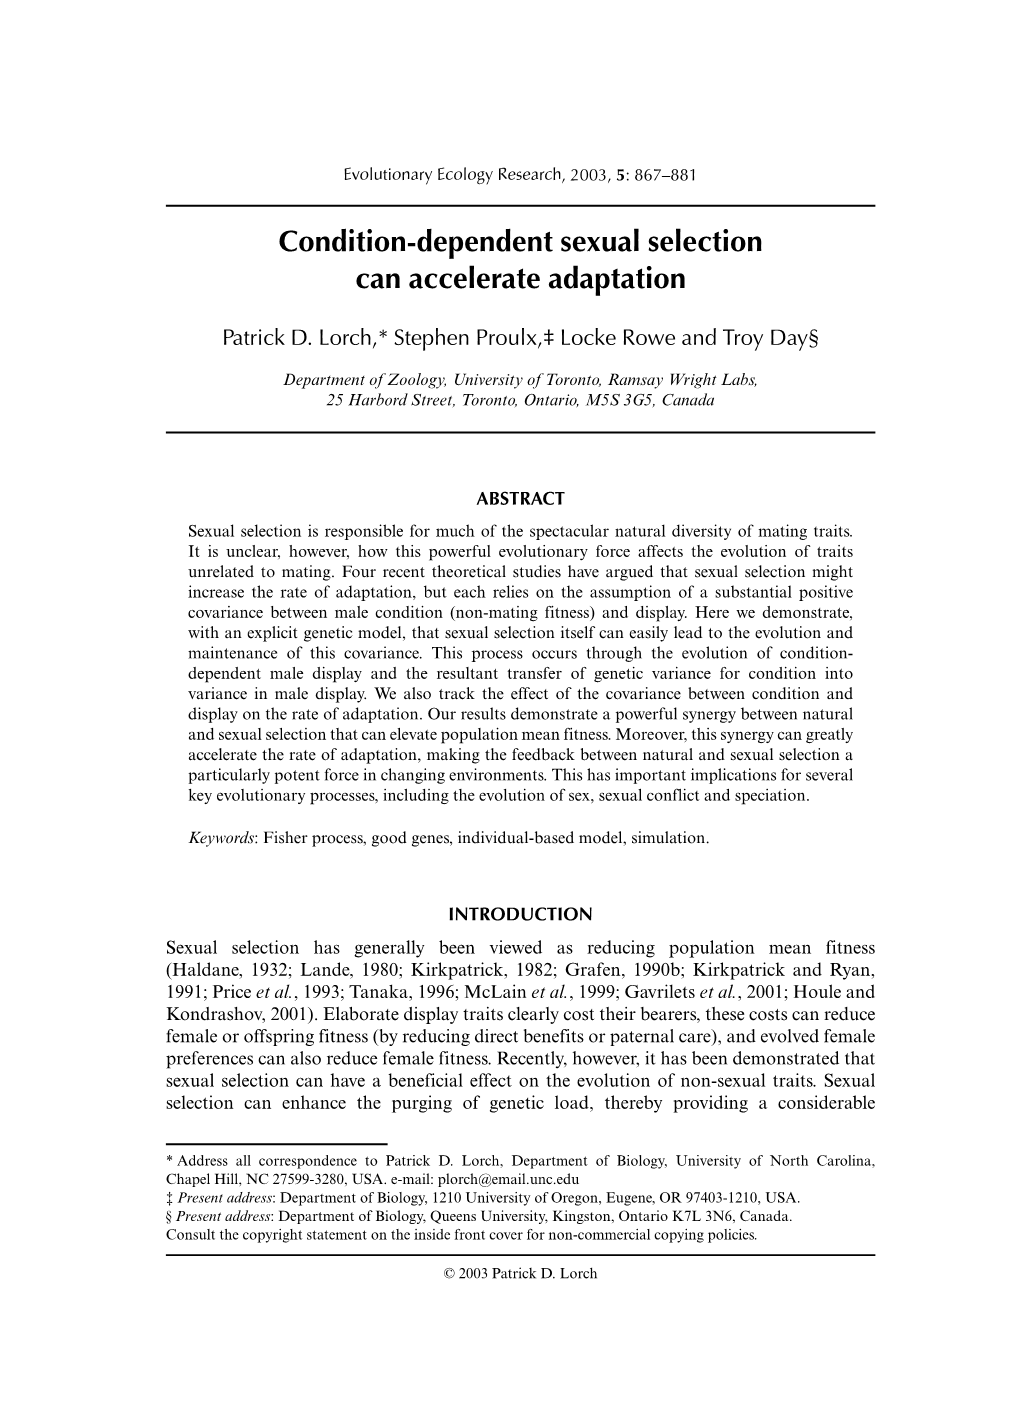 Condition-Dependent Sexual Selection Can Accelerate Adaptation